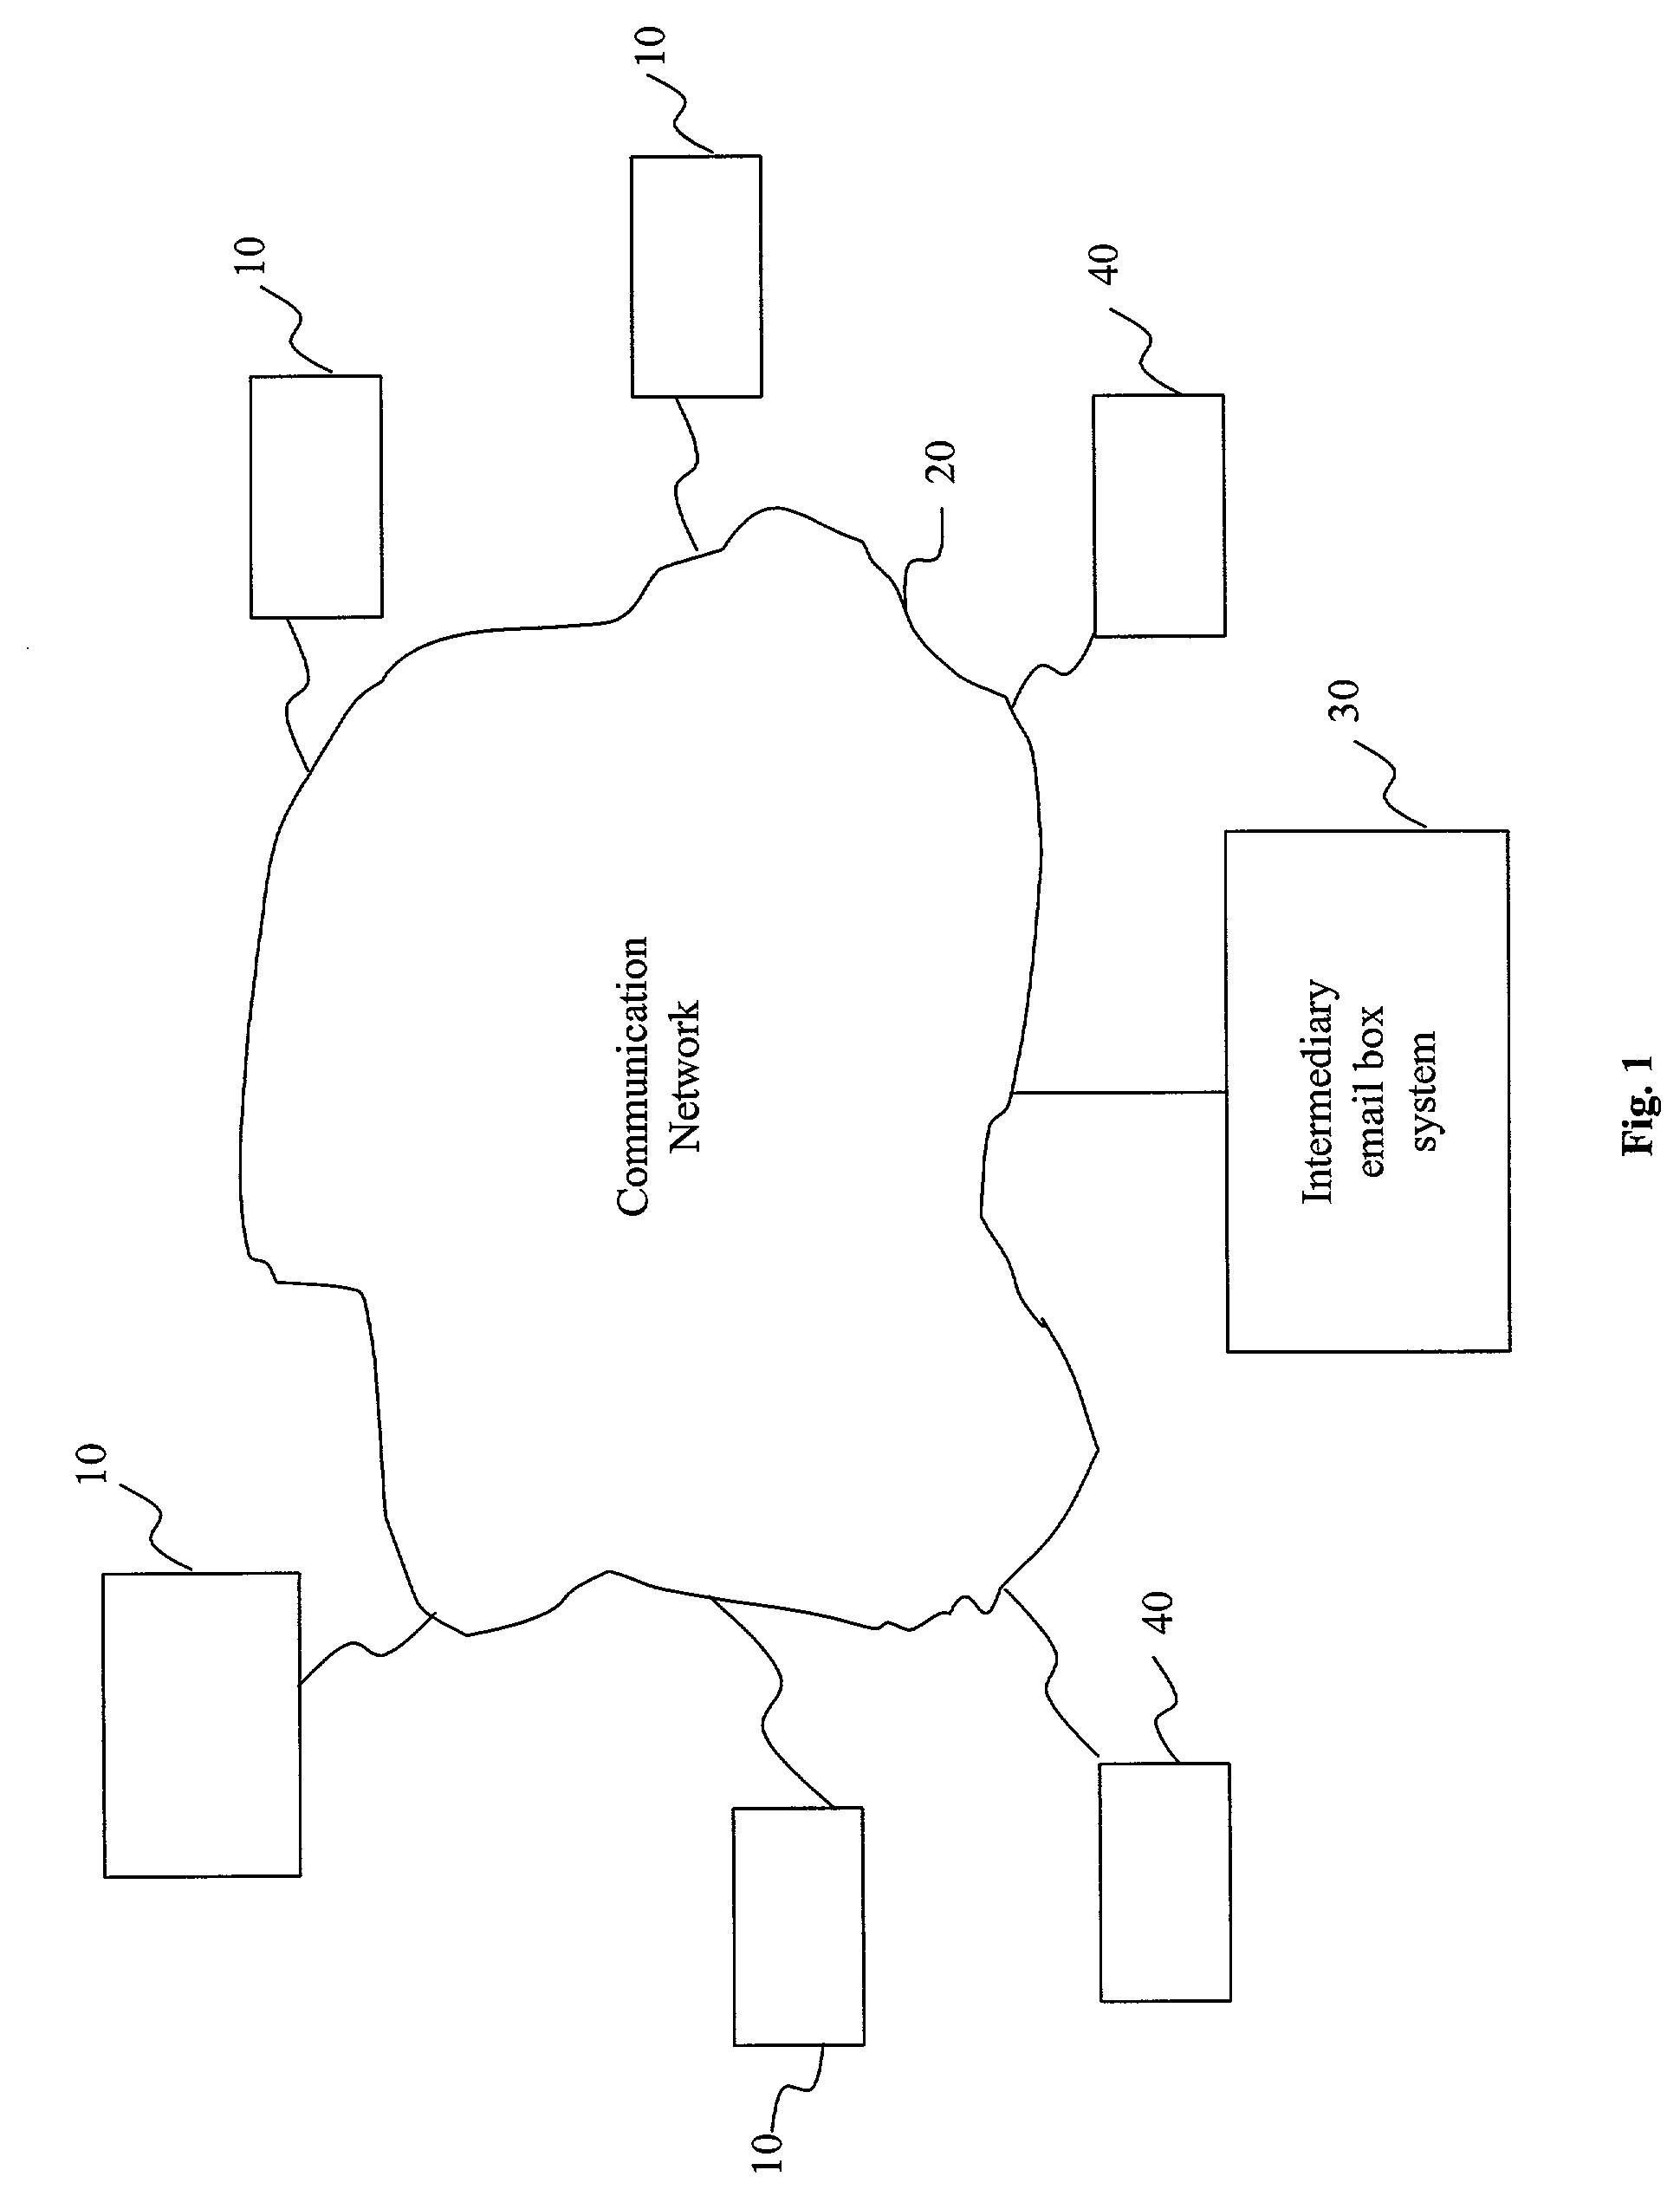 System and method for granting deposit-contingent E-mailing rights